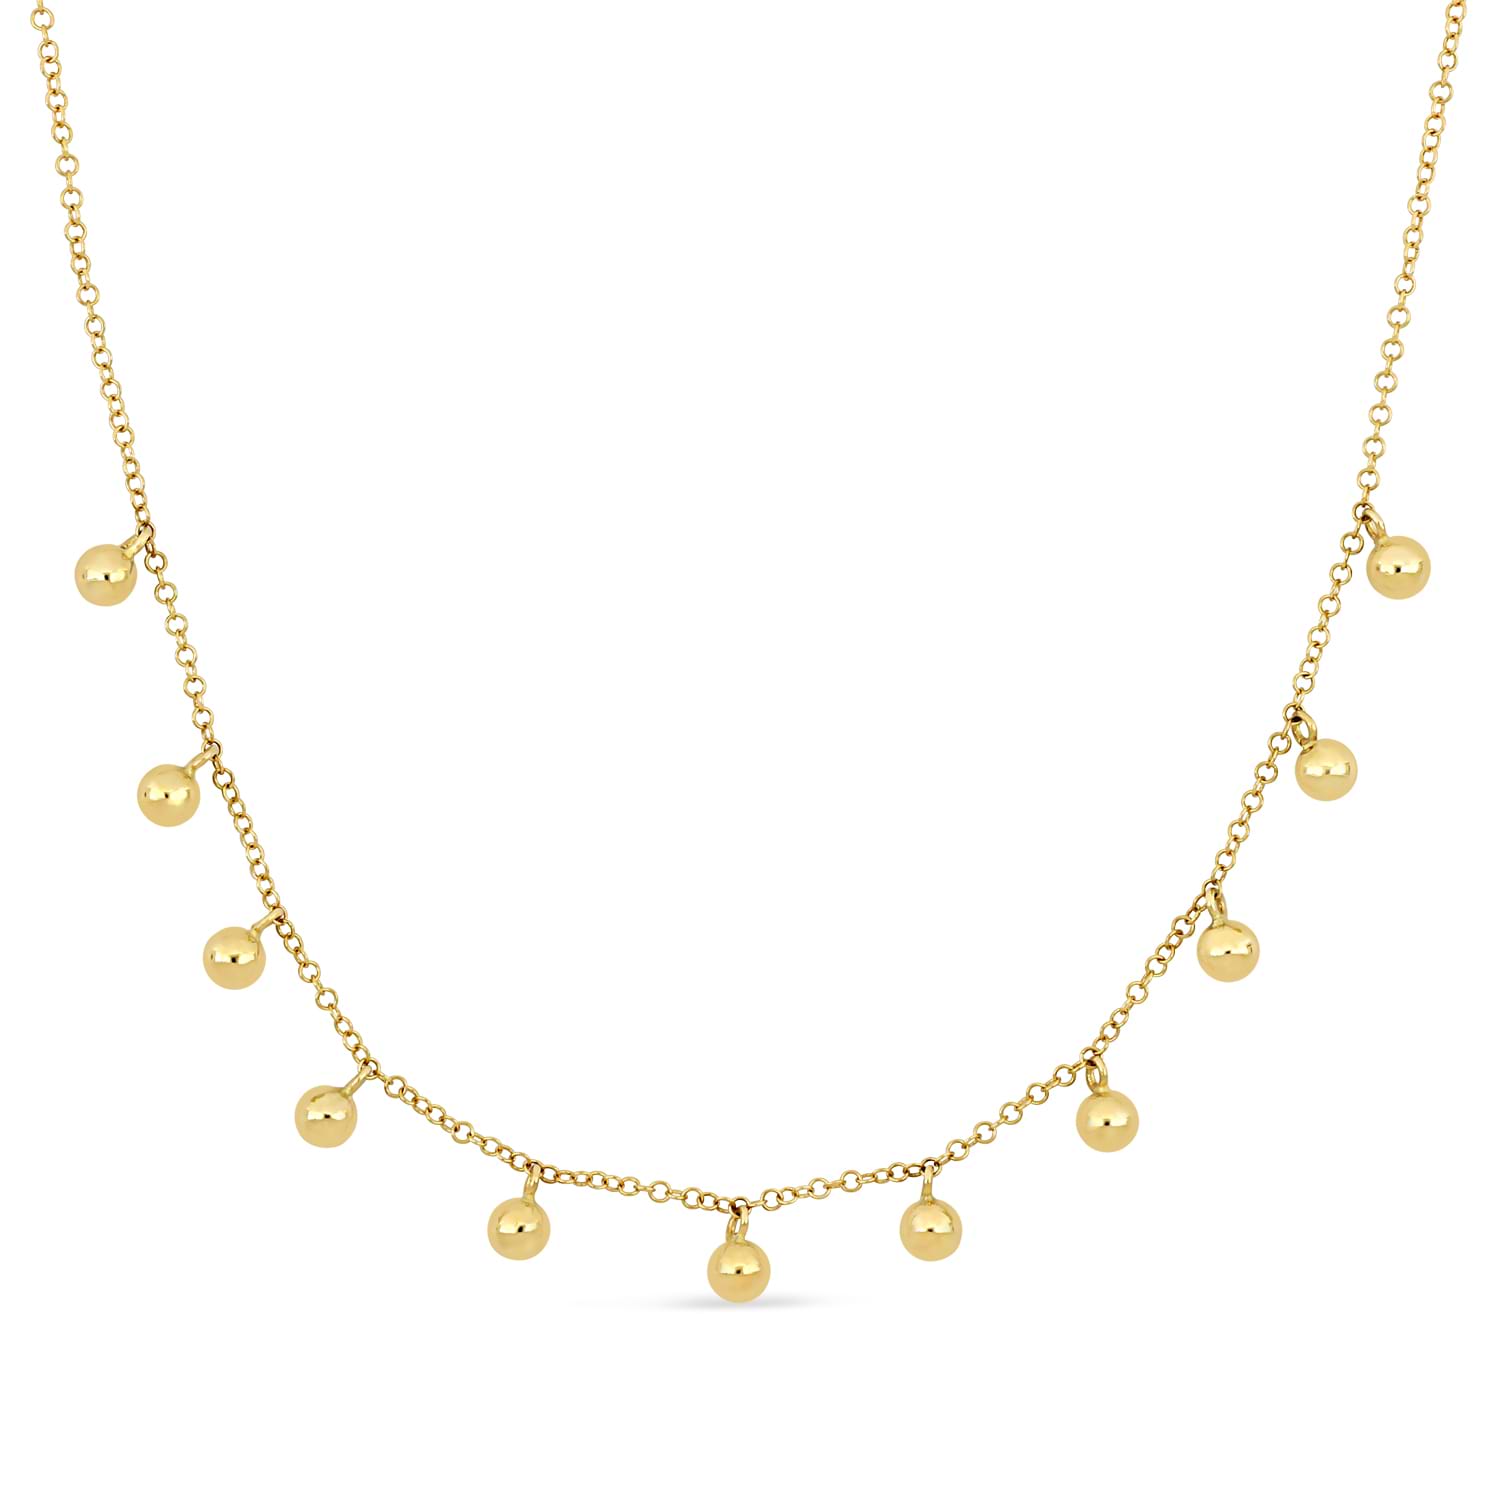 Fancy Spheres Necklace 18k Yellow Gold